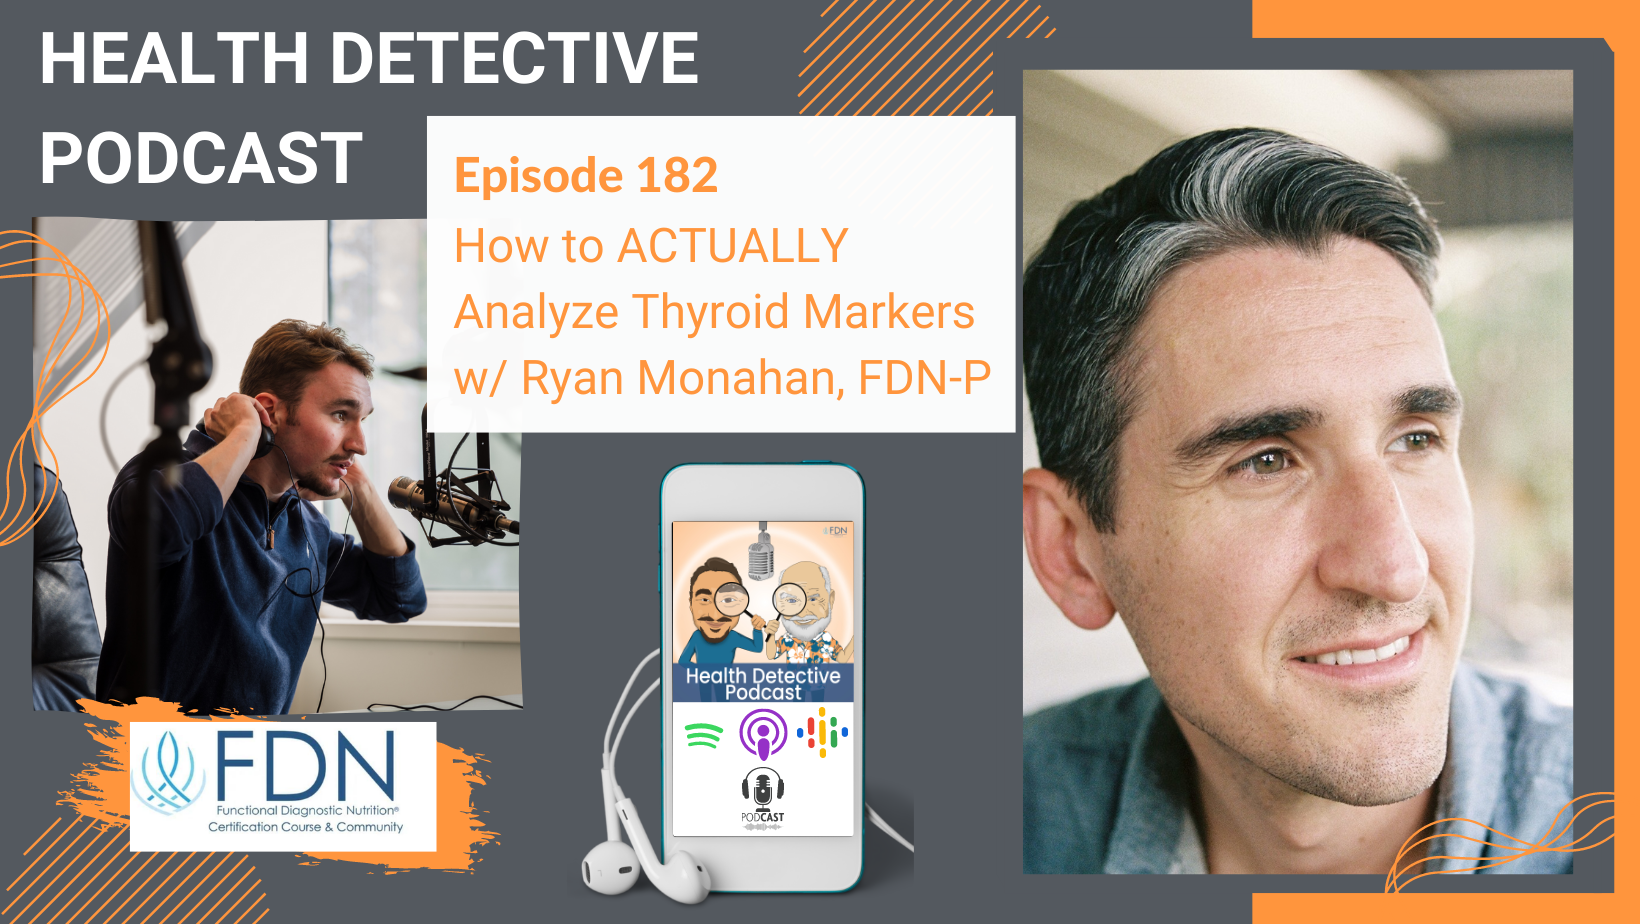 Episode 182: How to ACTUALLY Analyze Thyroid Markers w/ Ryan Monahan, FDN-P  How to Actually Analyze Thyroid Markers